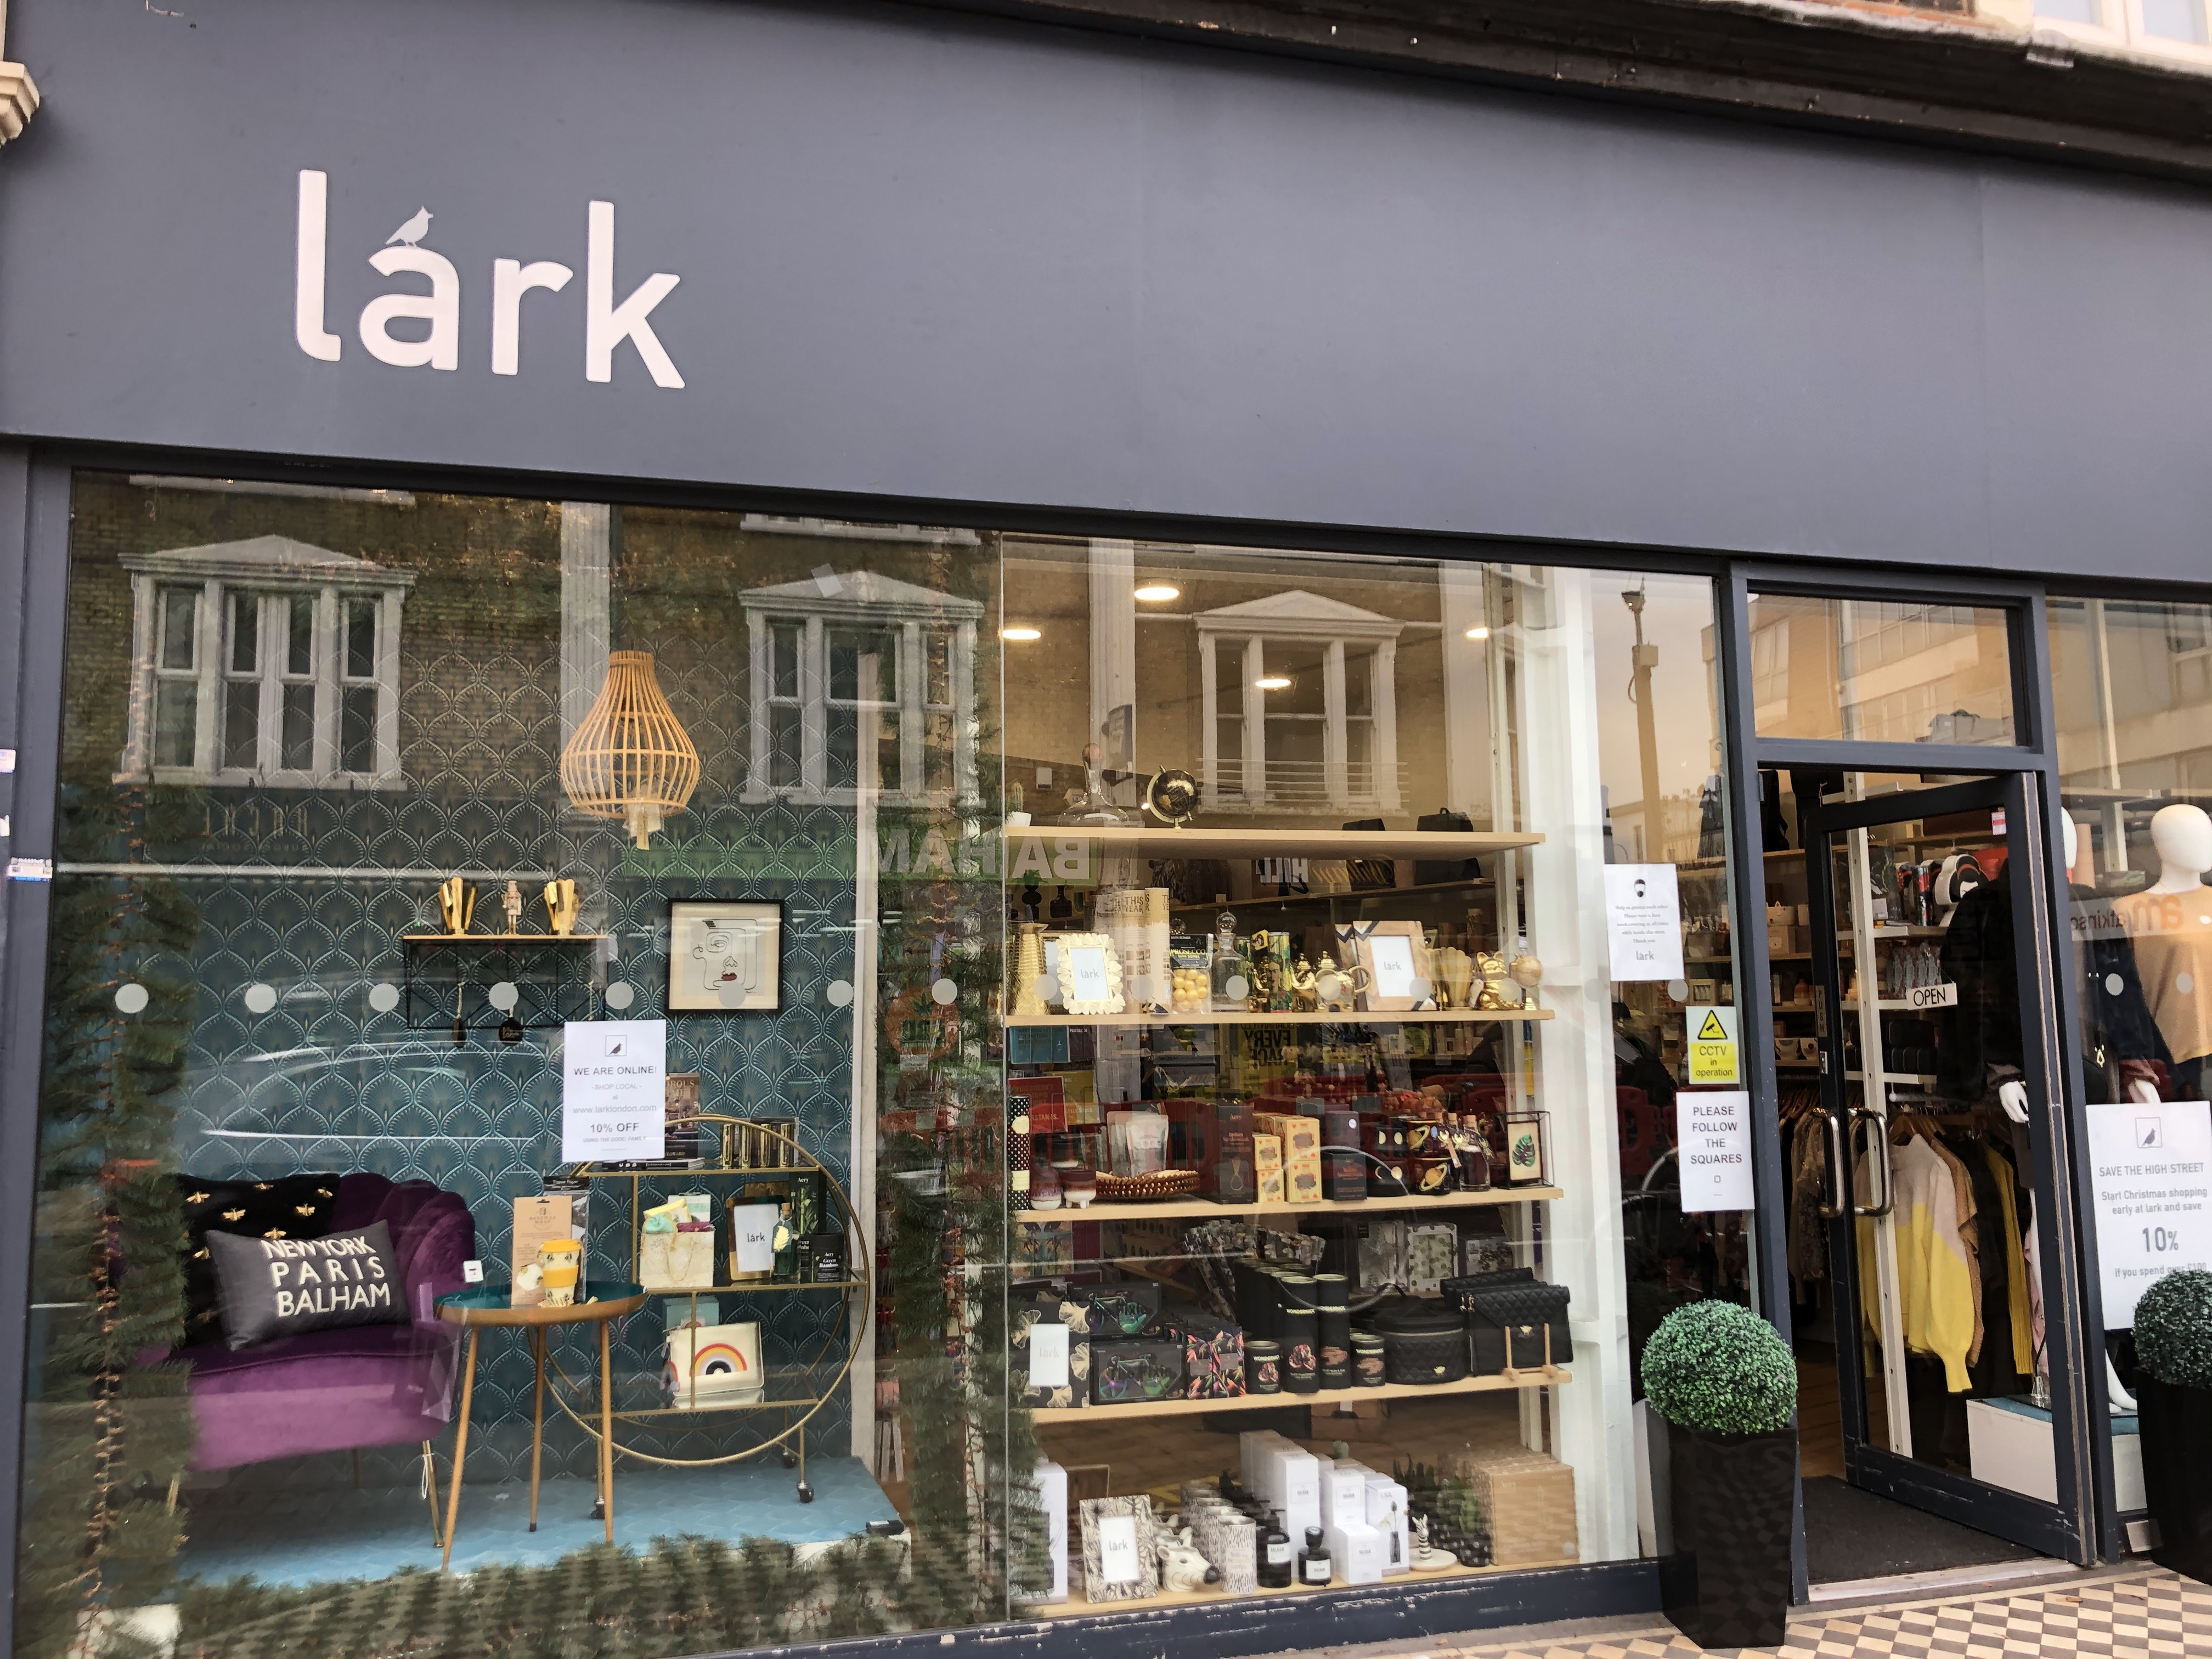 Above: Regulars and new customers have been out in force for Lark.